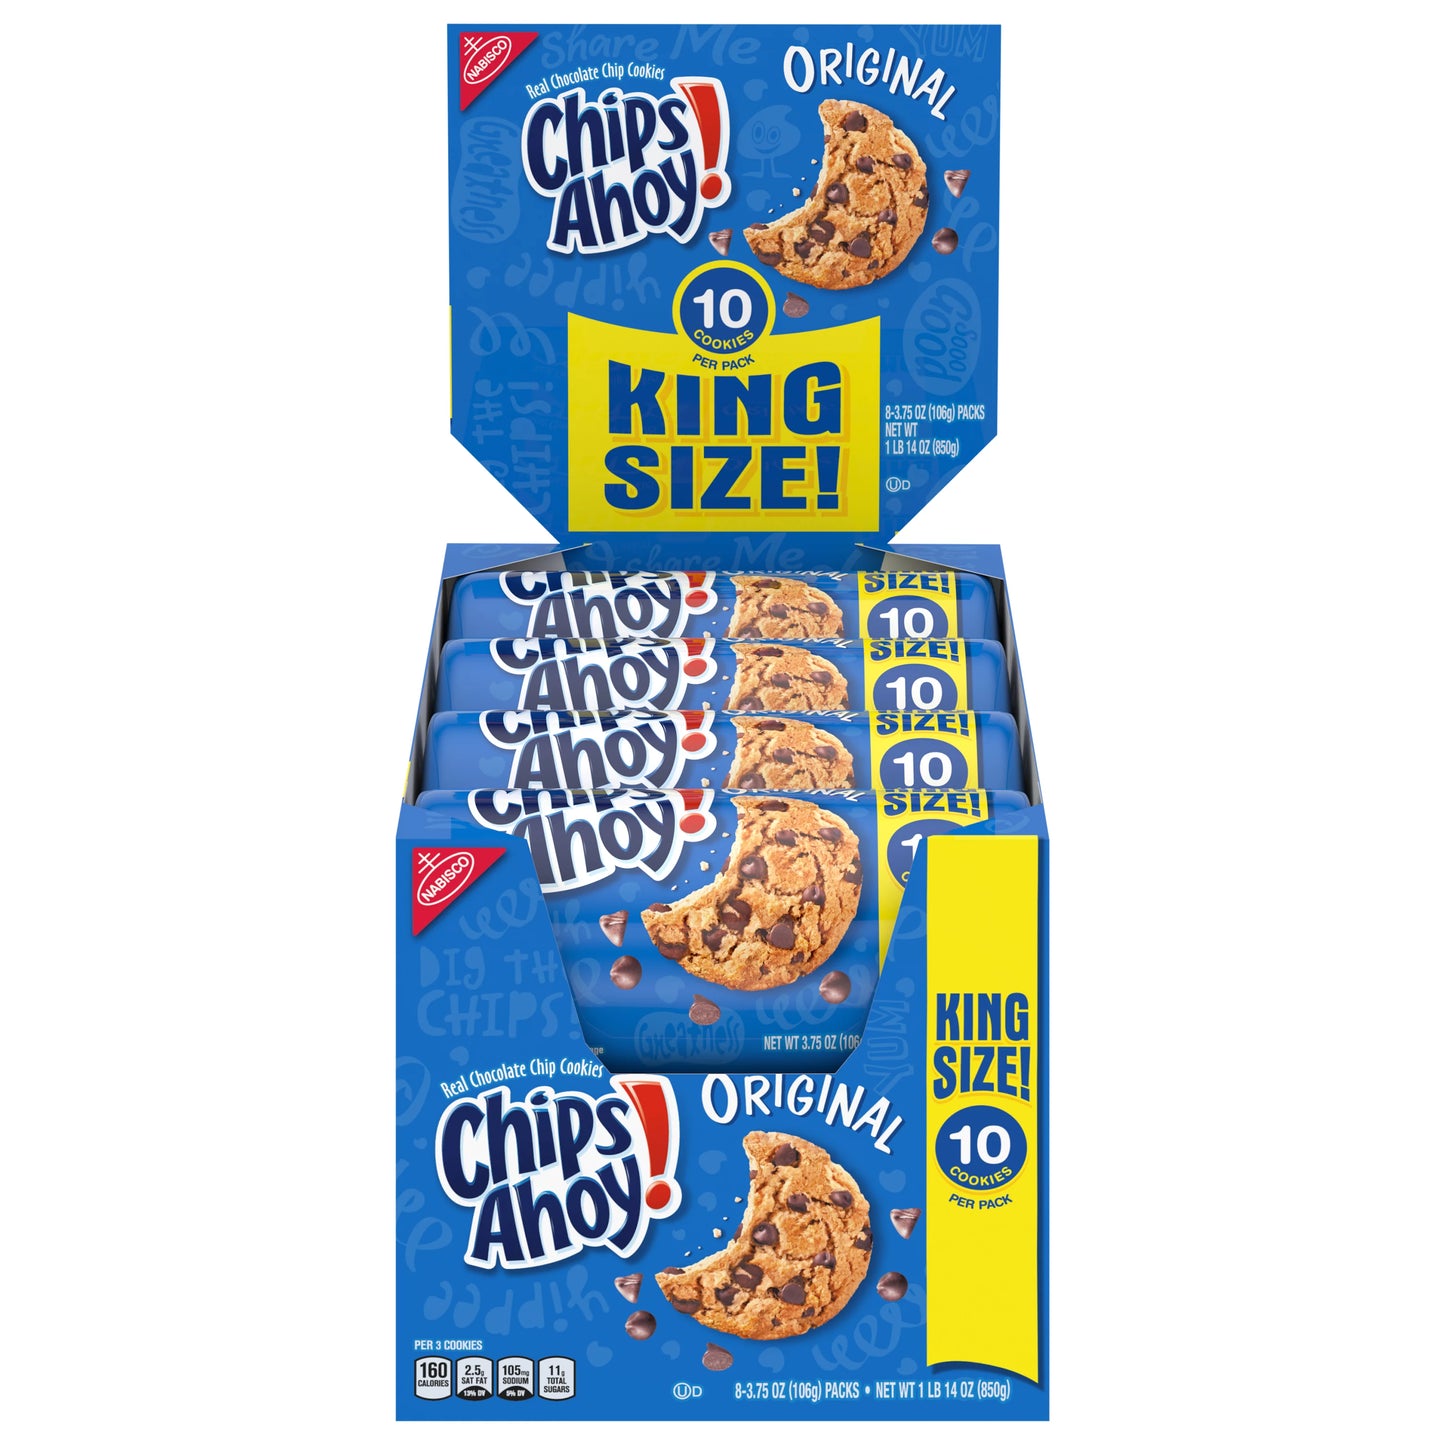 Chips Ahoy! Original King Size Cookies 3.75oz (Pack of 8)